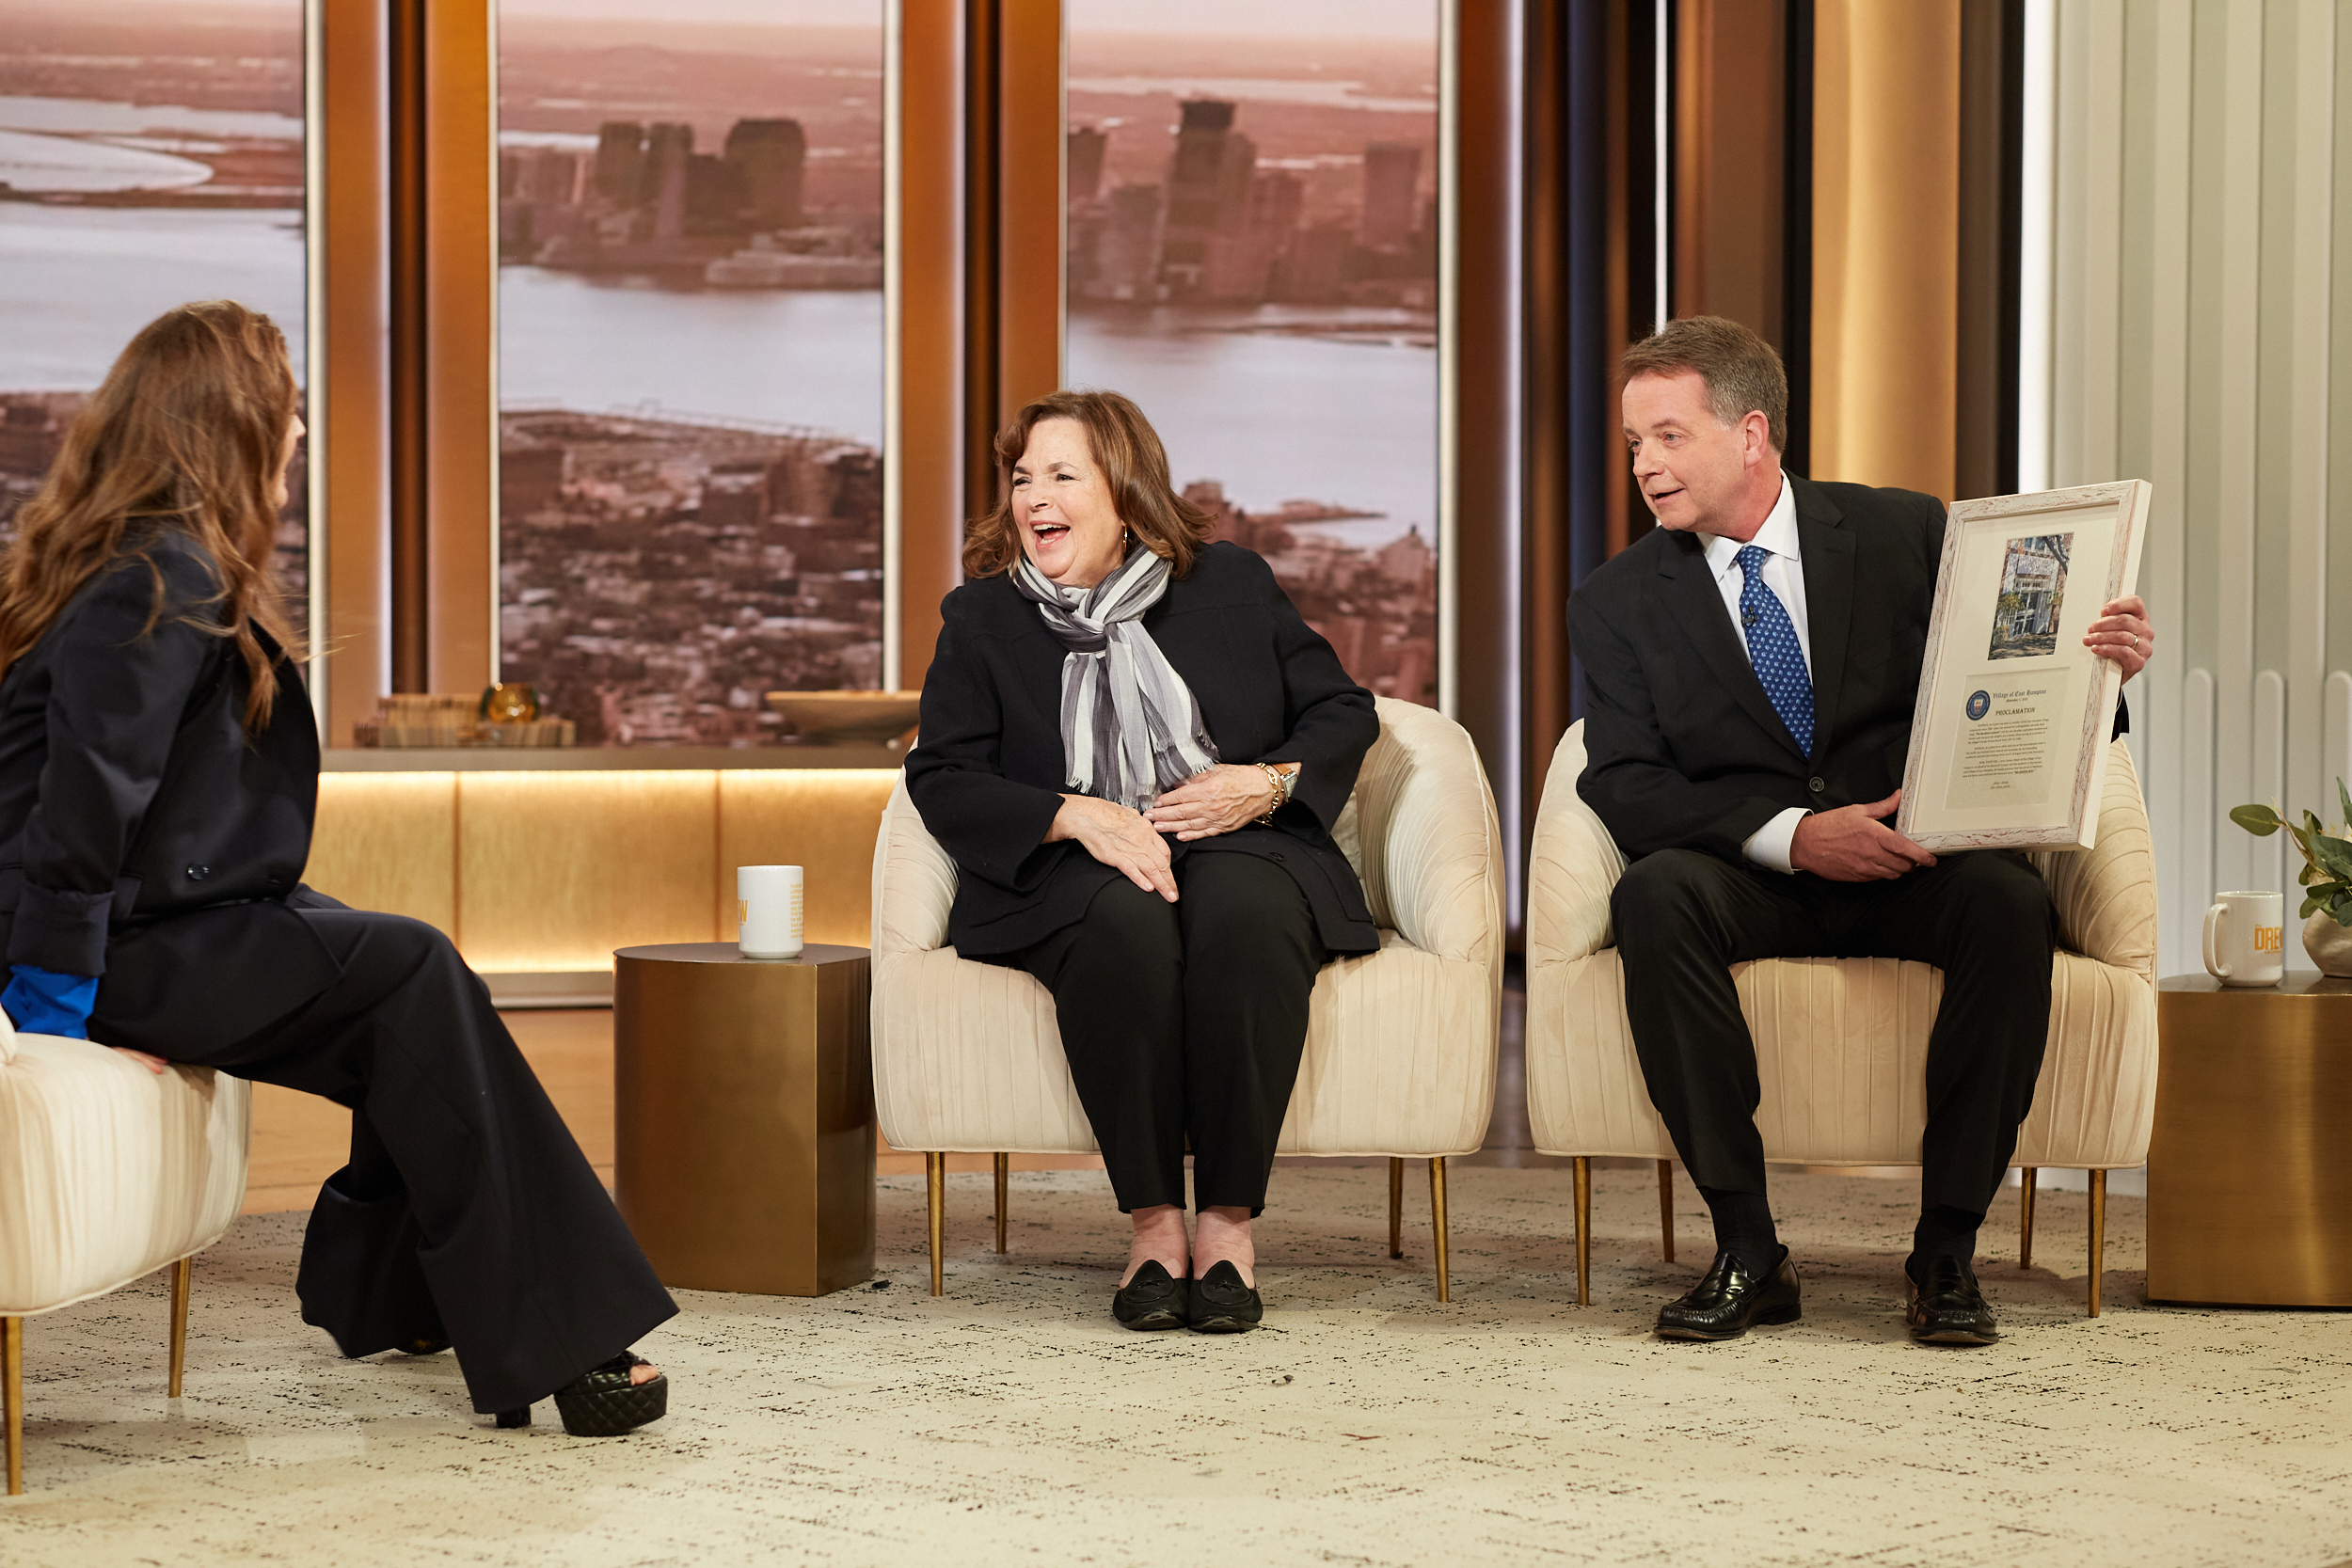 East Hampton Mayor Jerry Larsen made a surprise appearance on the Drew Barrymore Show when Ina Garten was a guest recently to announce that East Hampton Village has dedicated an alley near her former store, Barefoot Contessa, in honor of Garten.